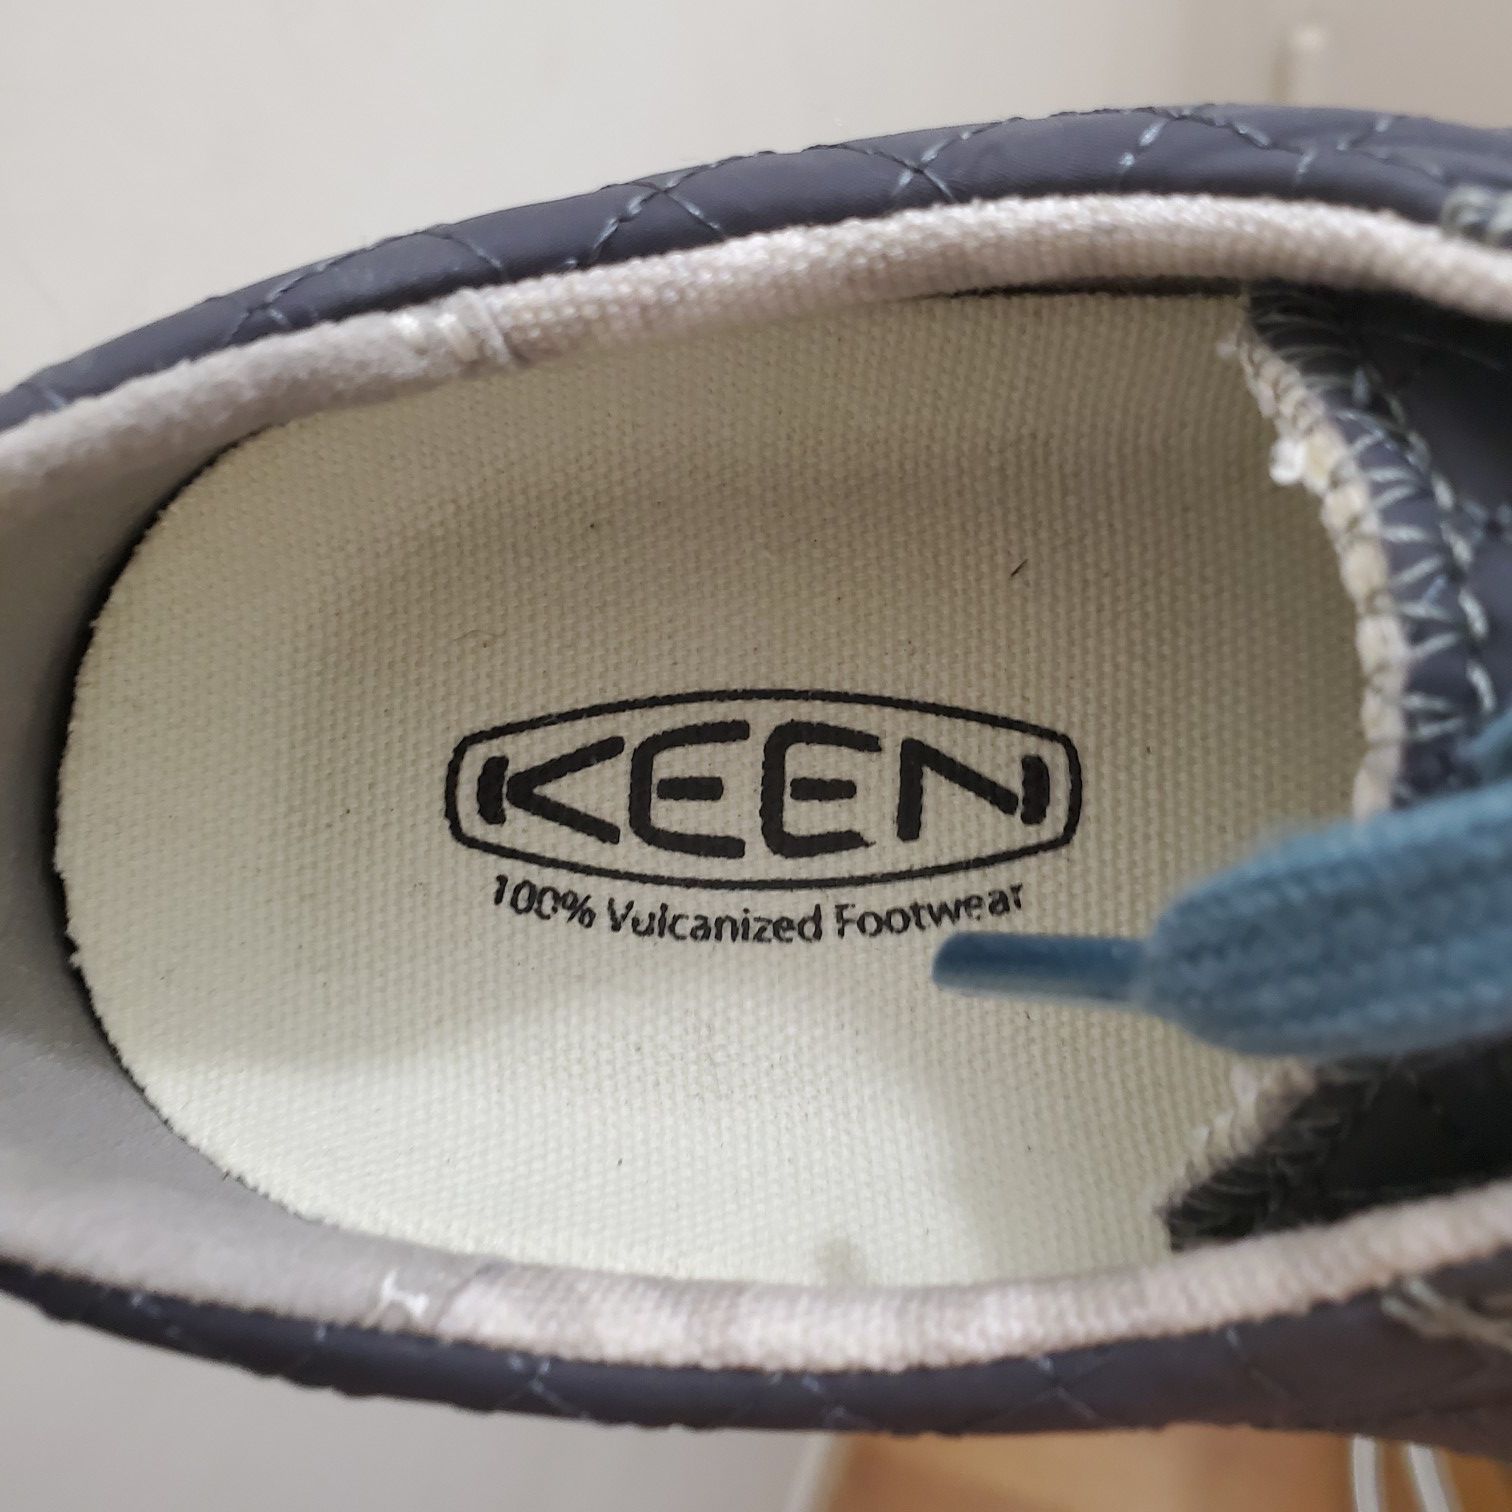 NWOT mens KEEN shoes size 7